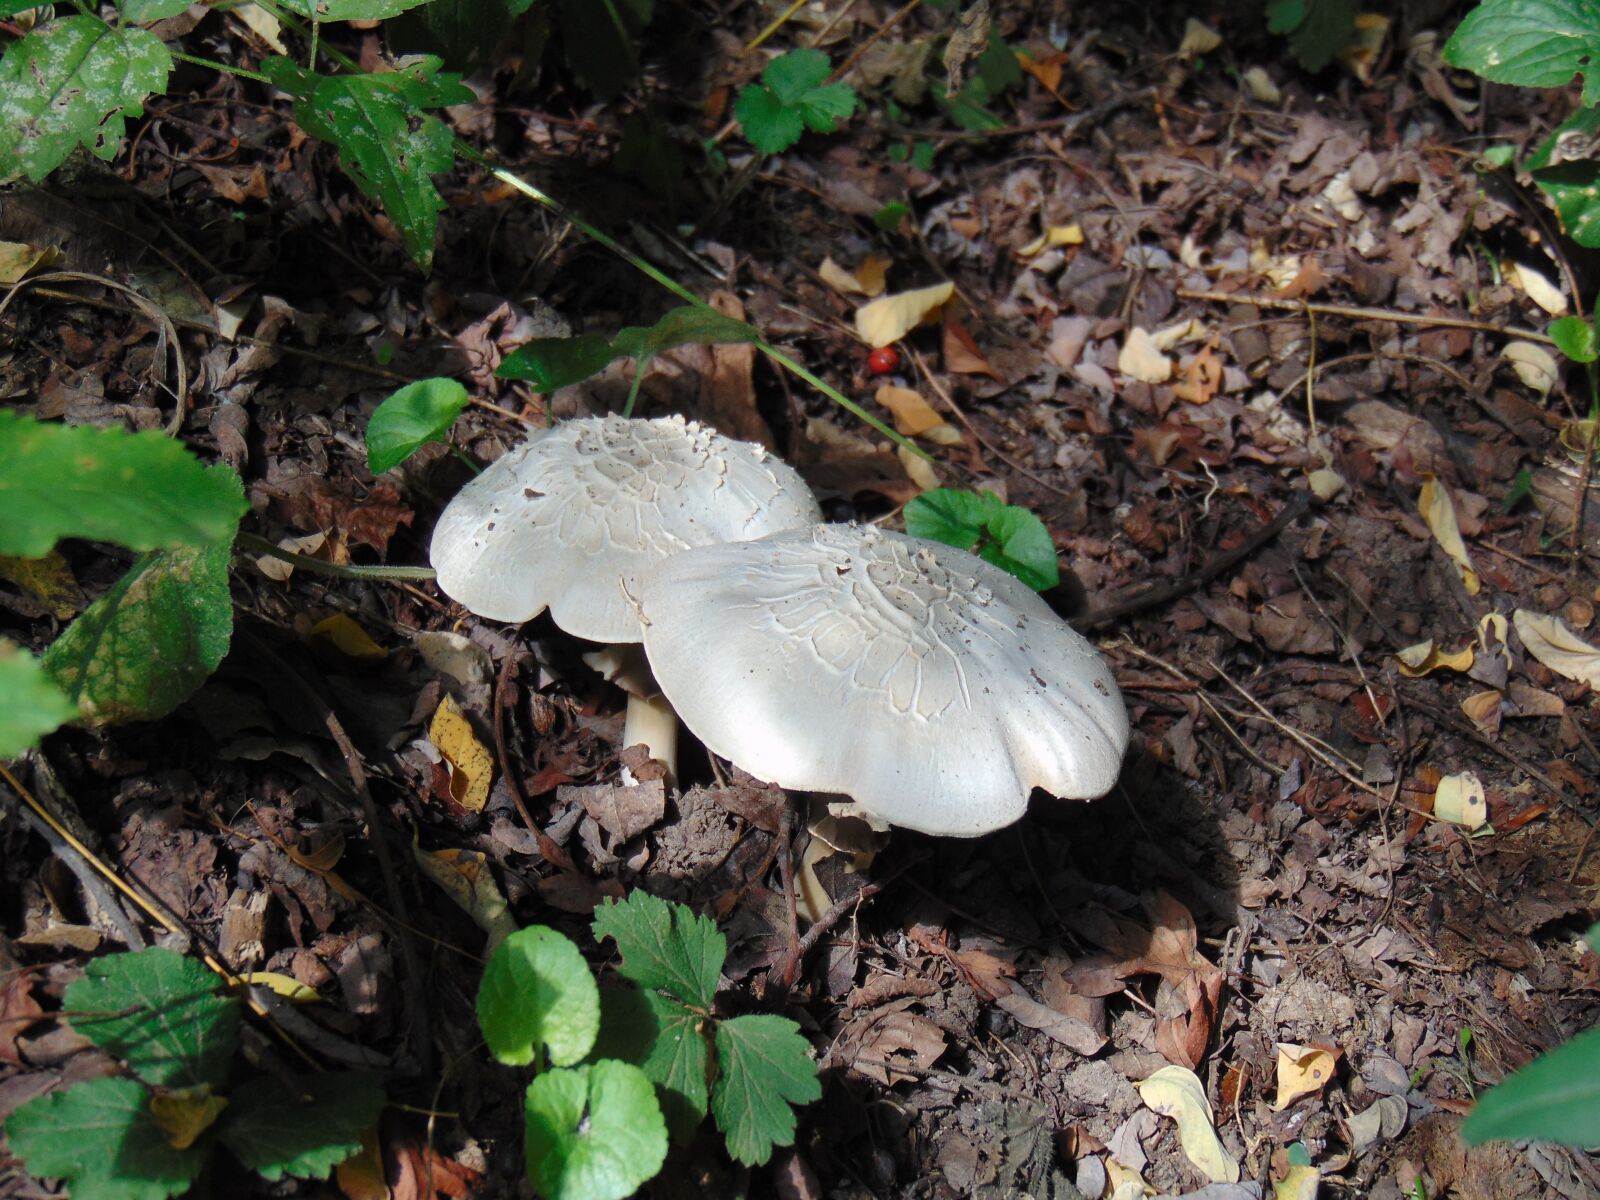 Sony Cyber-shot DSC-H300 sample photo. Mushroom, forest, nature photography